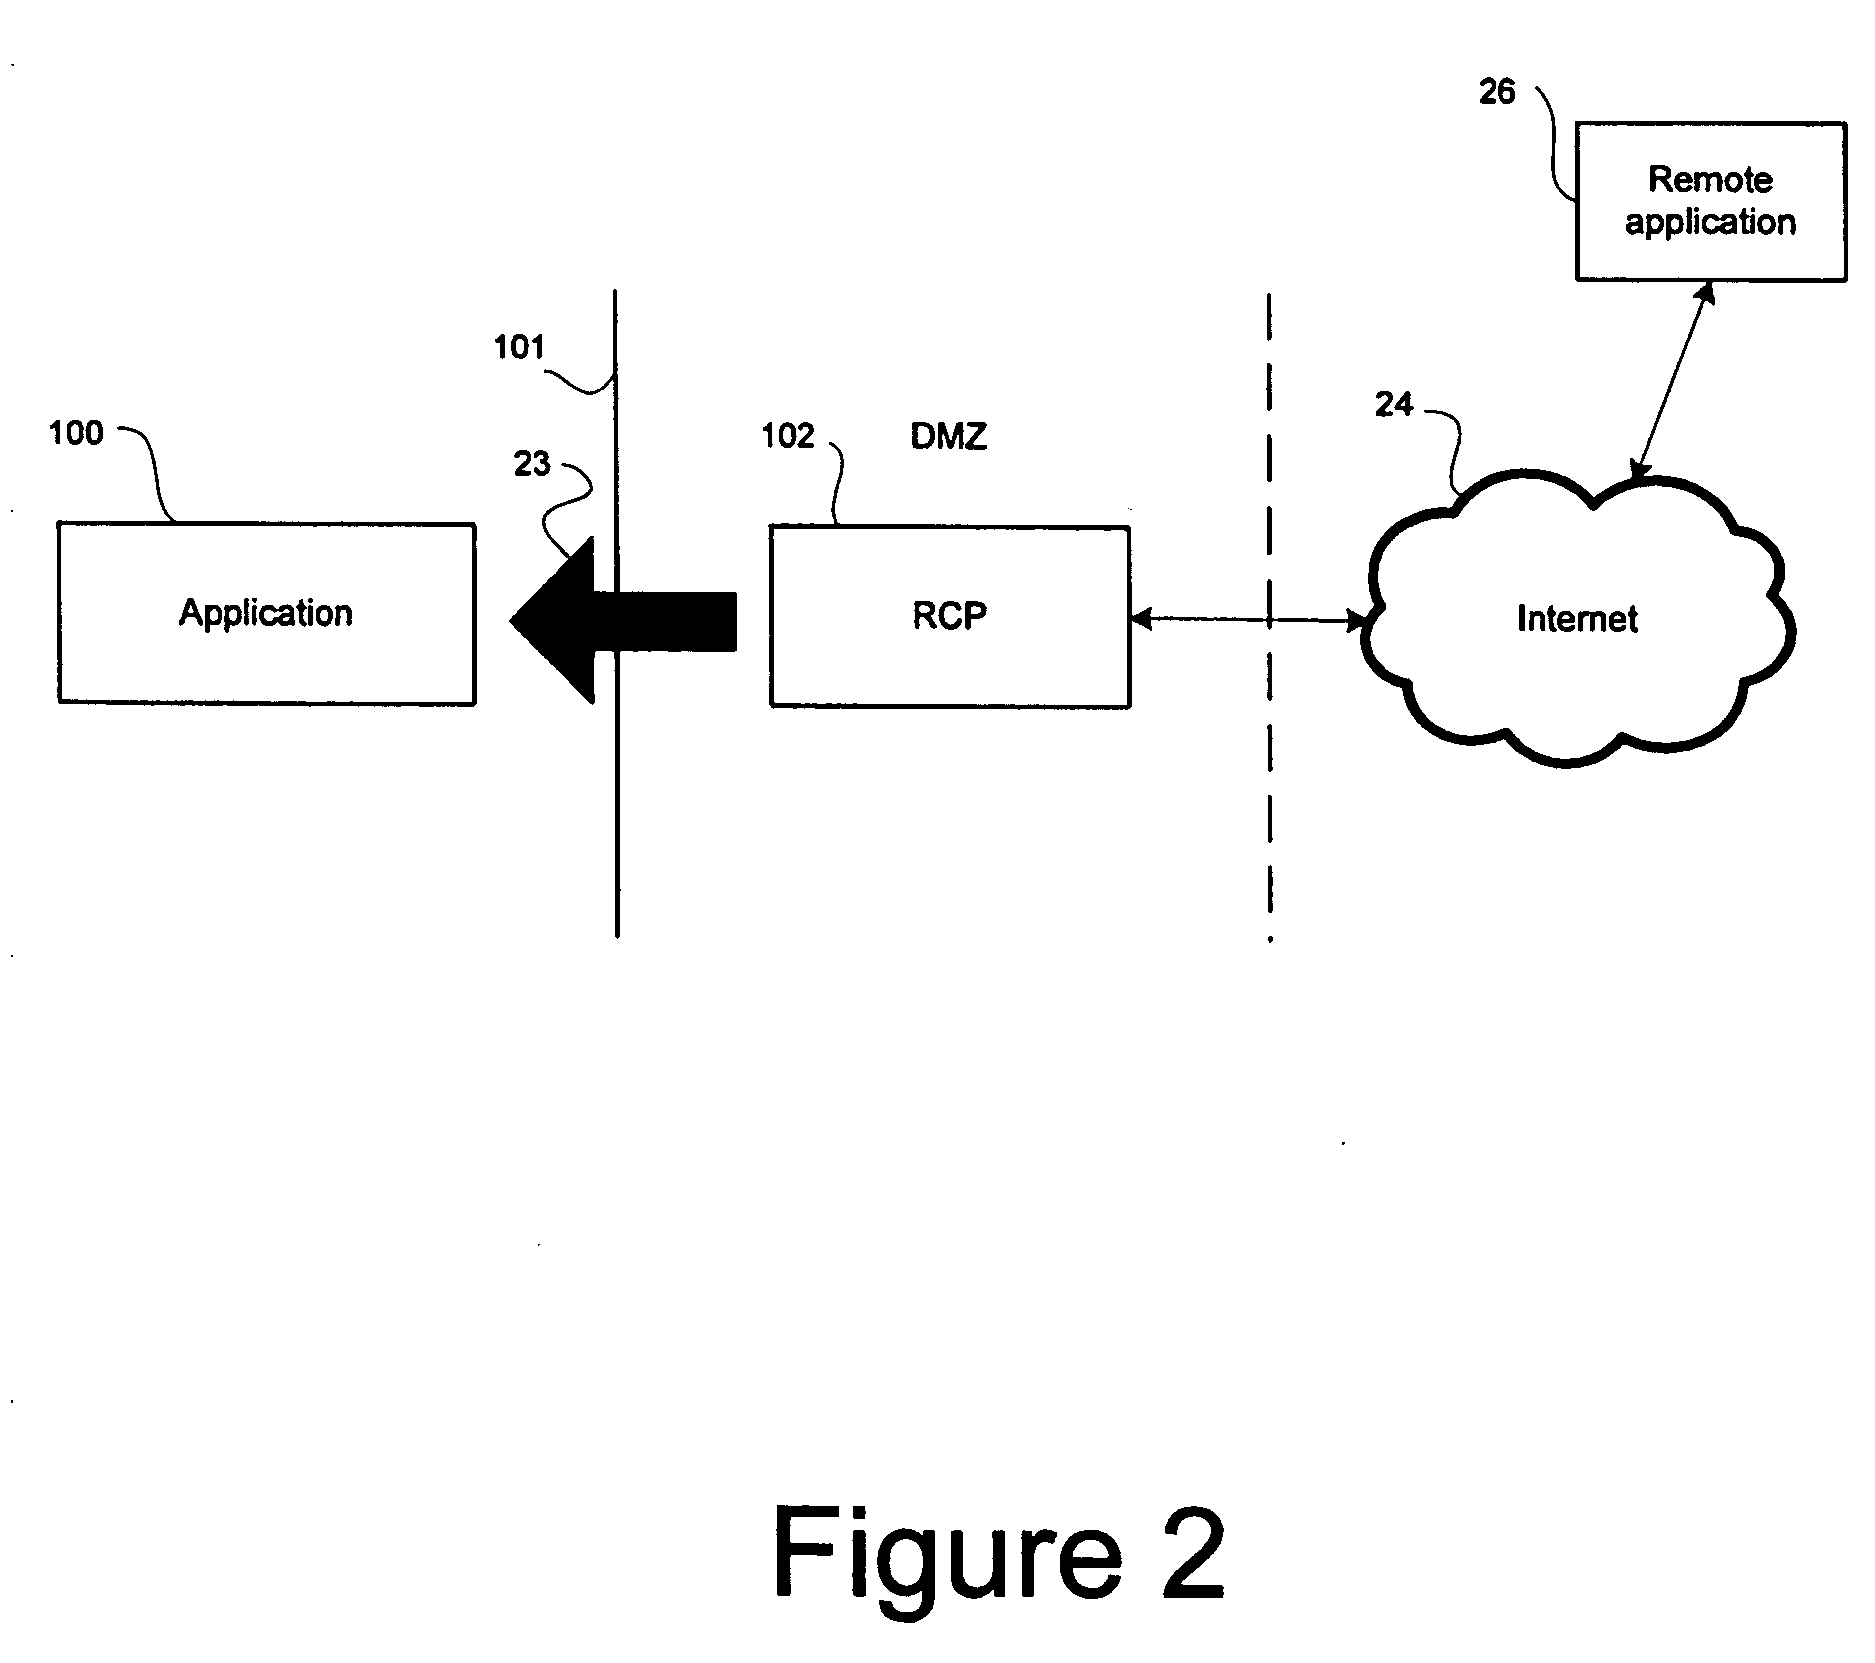 Methods of setting up and operating a reverse channel across a firewall